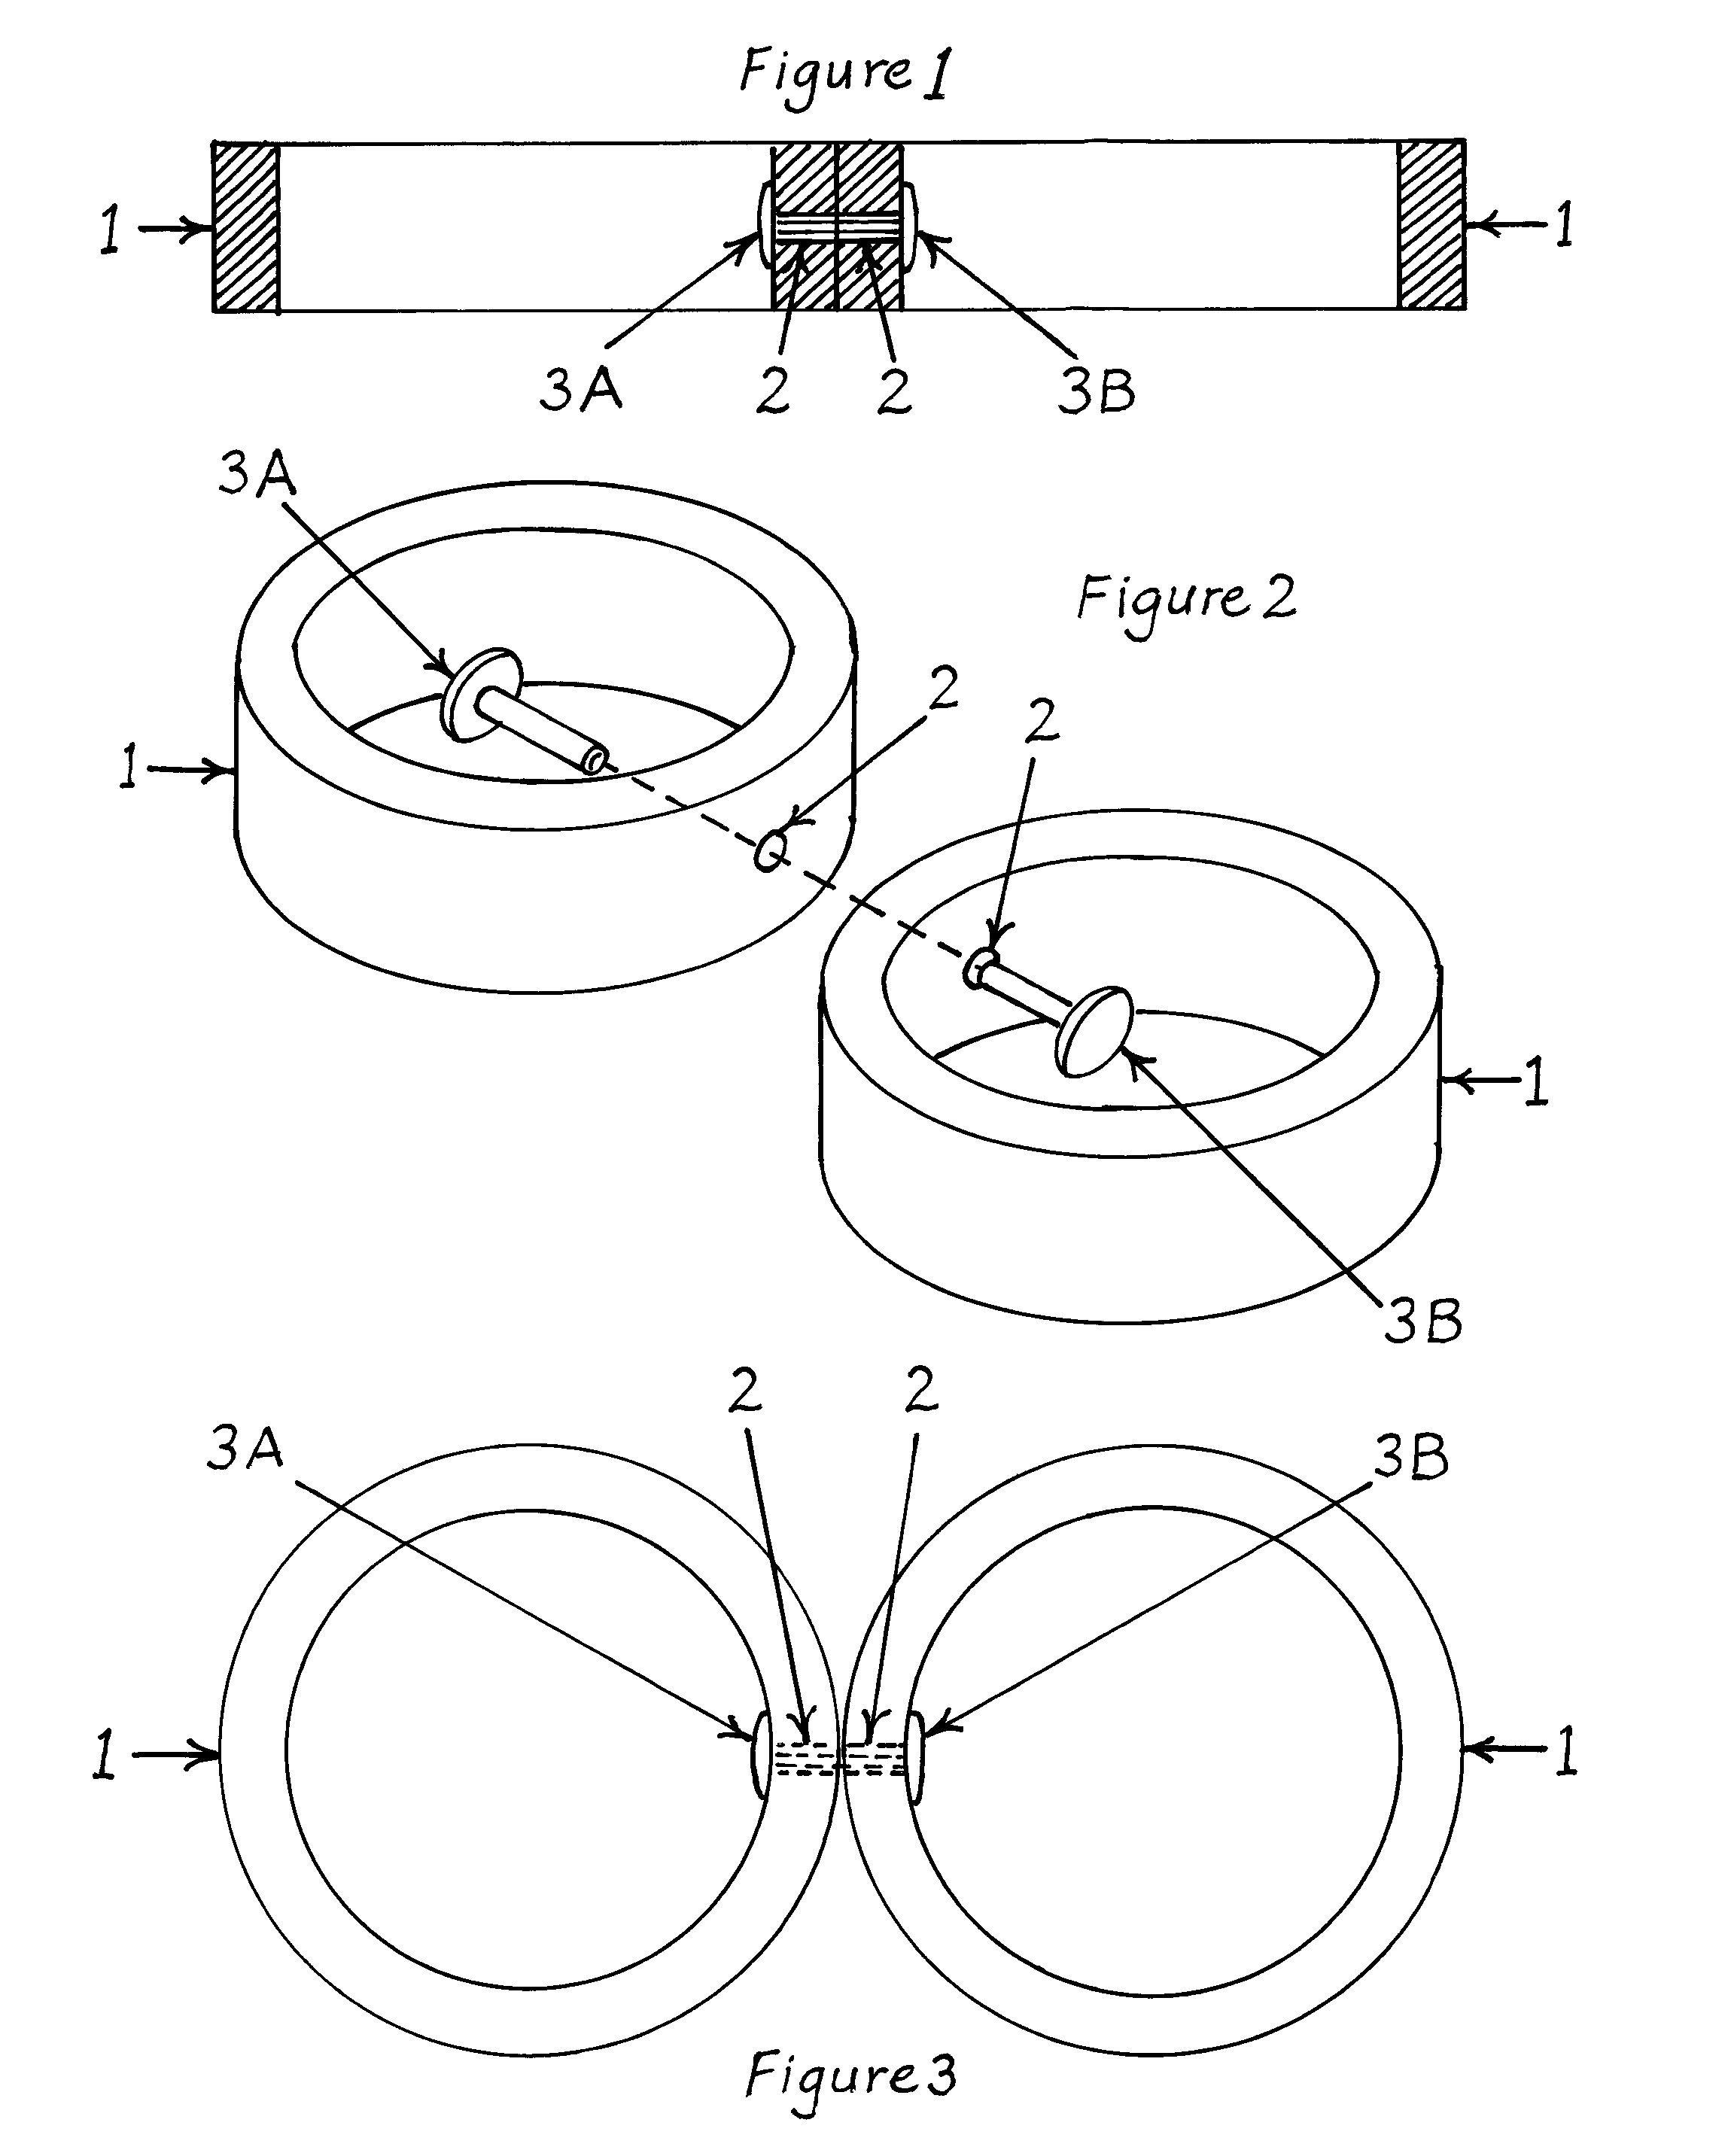 Swiveling Device for Connecting Swimming Pool Flotation Noodles